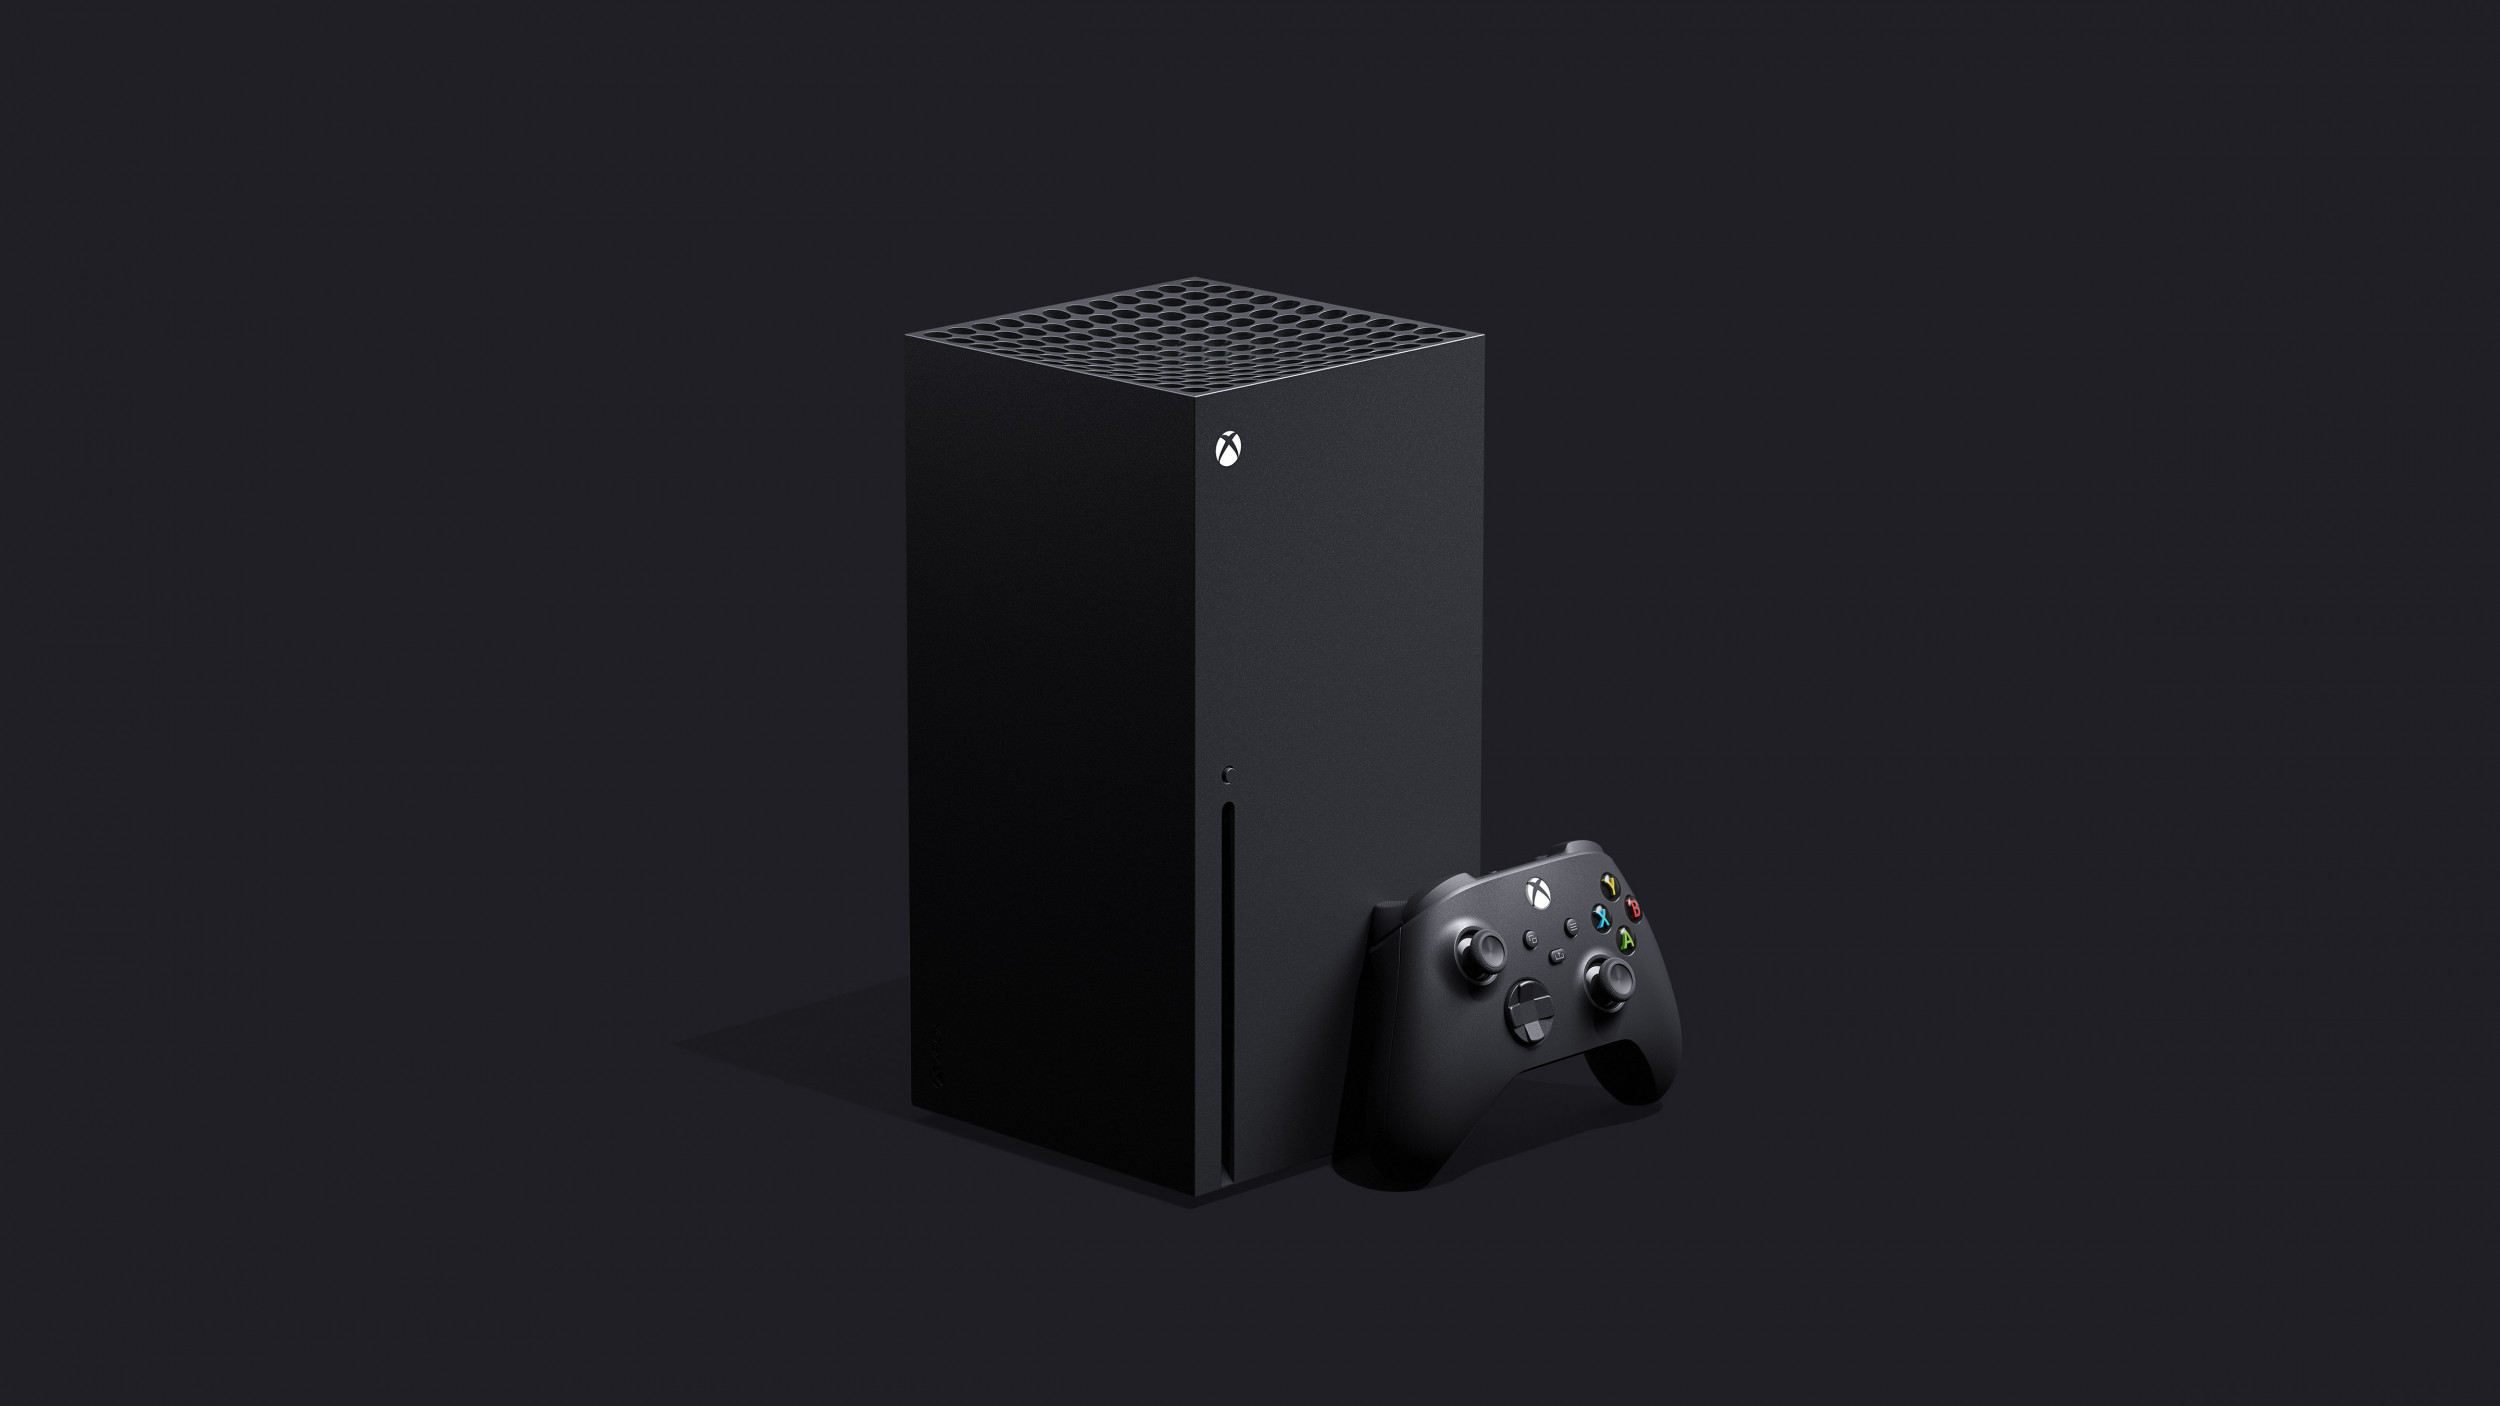 when is the new xbox console coming out